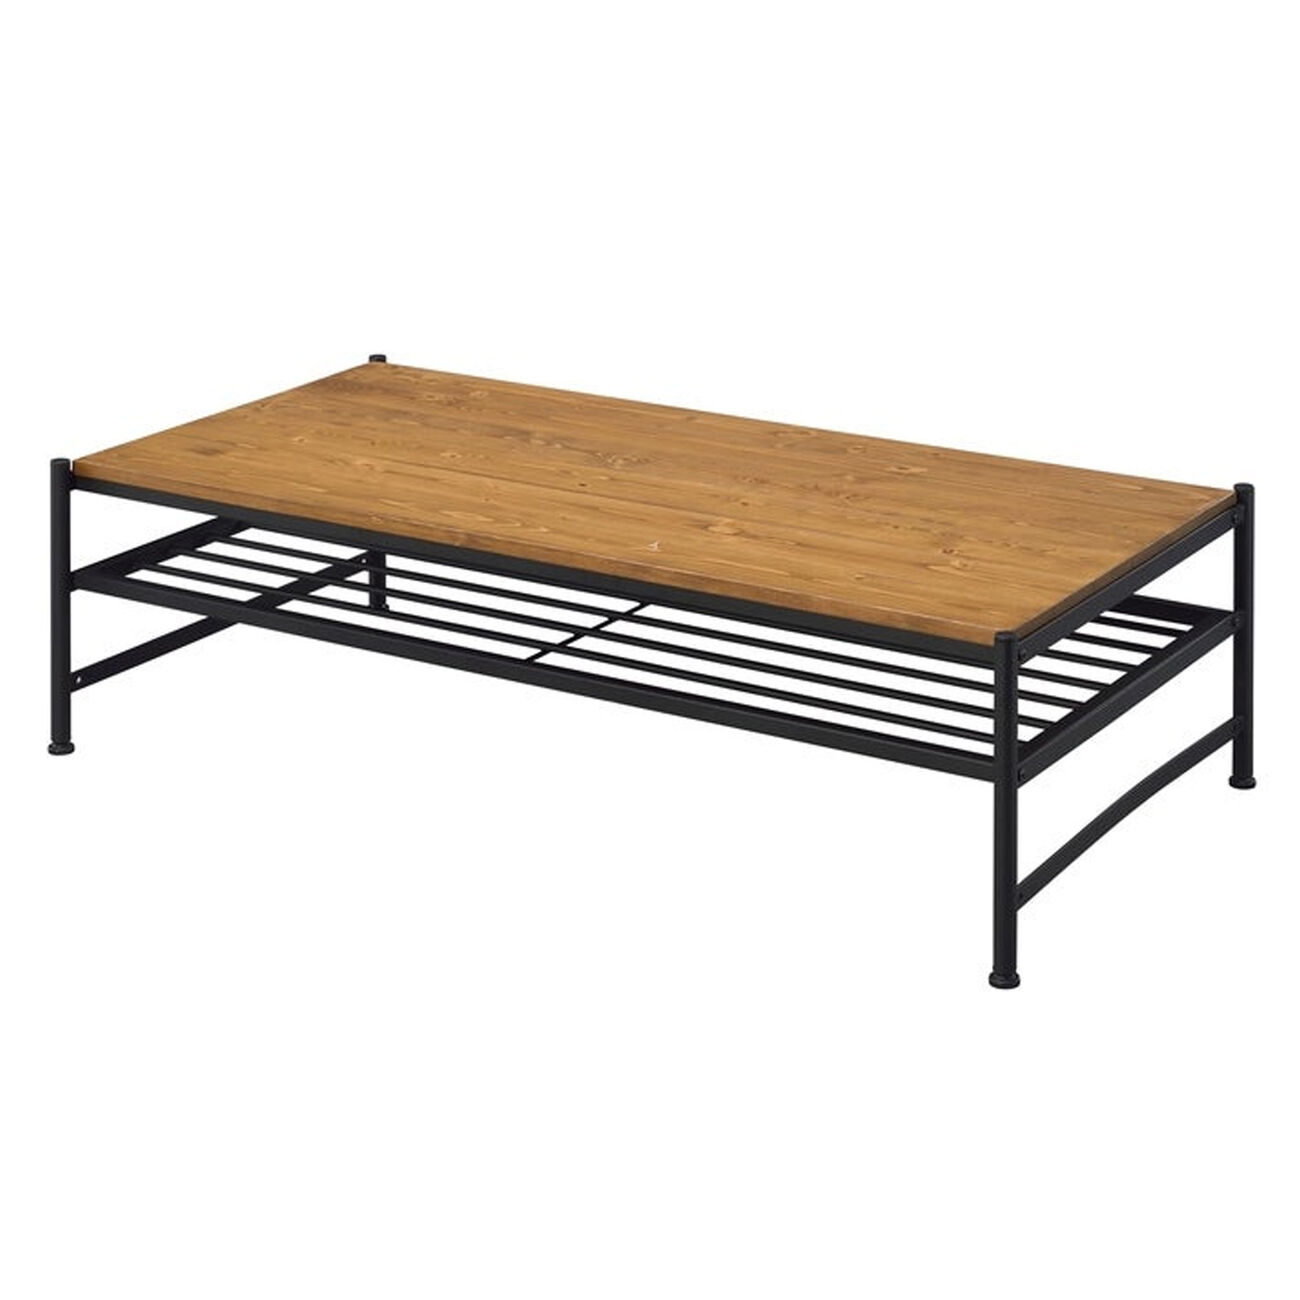 Metal and Wood Coffee Table with Slatted Bottom Shelf,Brown and Black